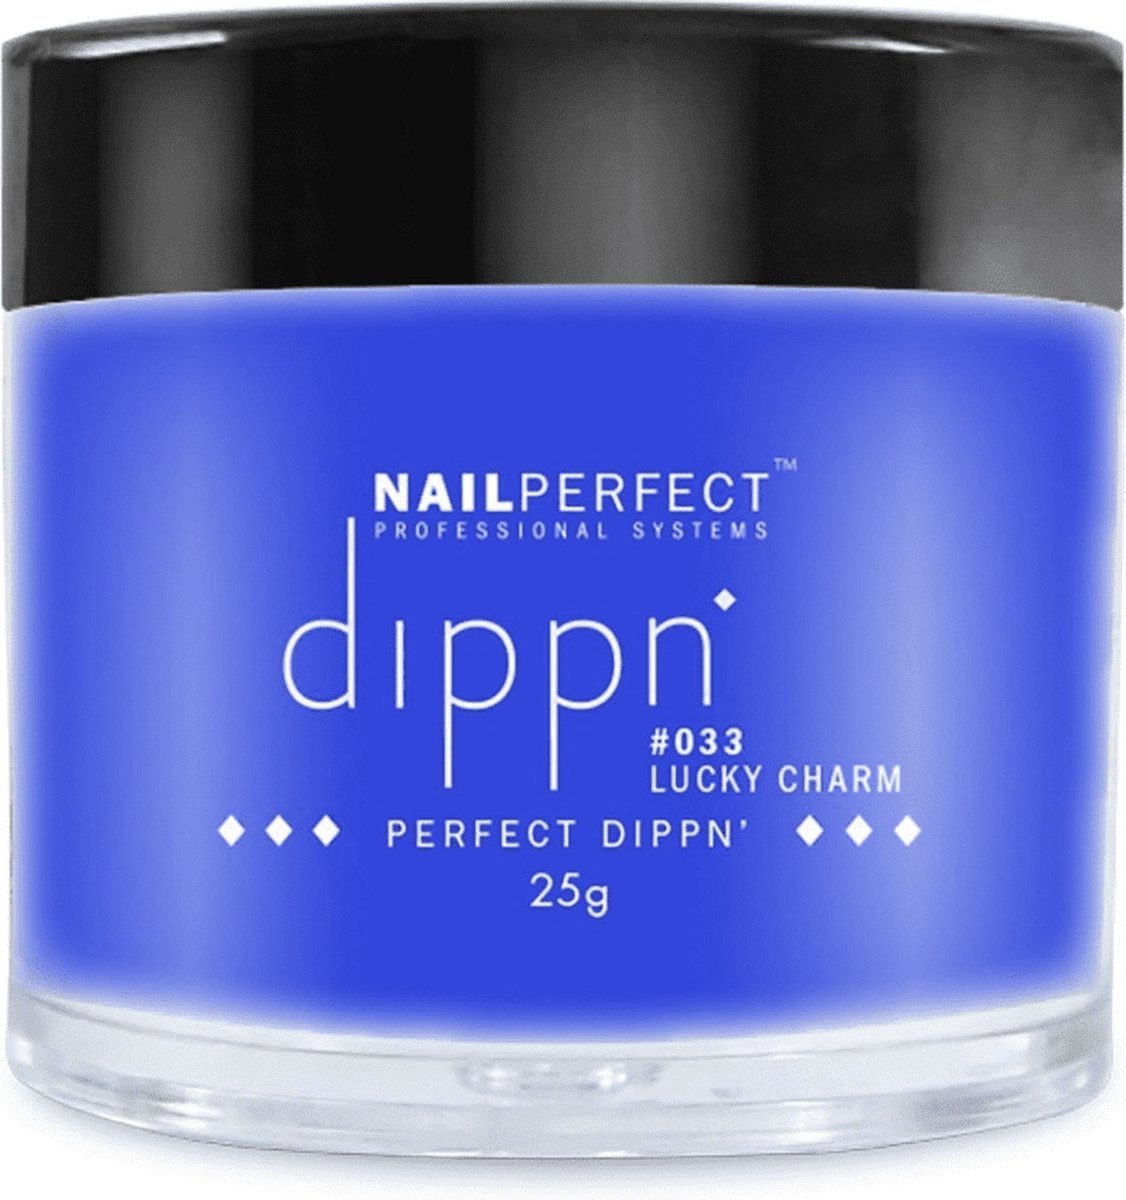 Nail Perfect - Dippn - #033 Lucky Charm - 25gr